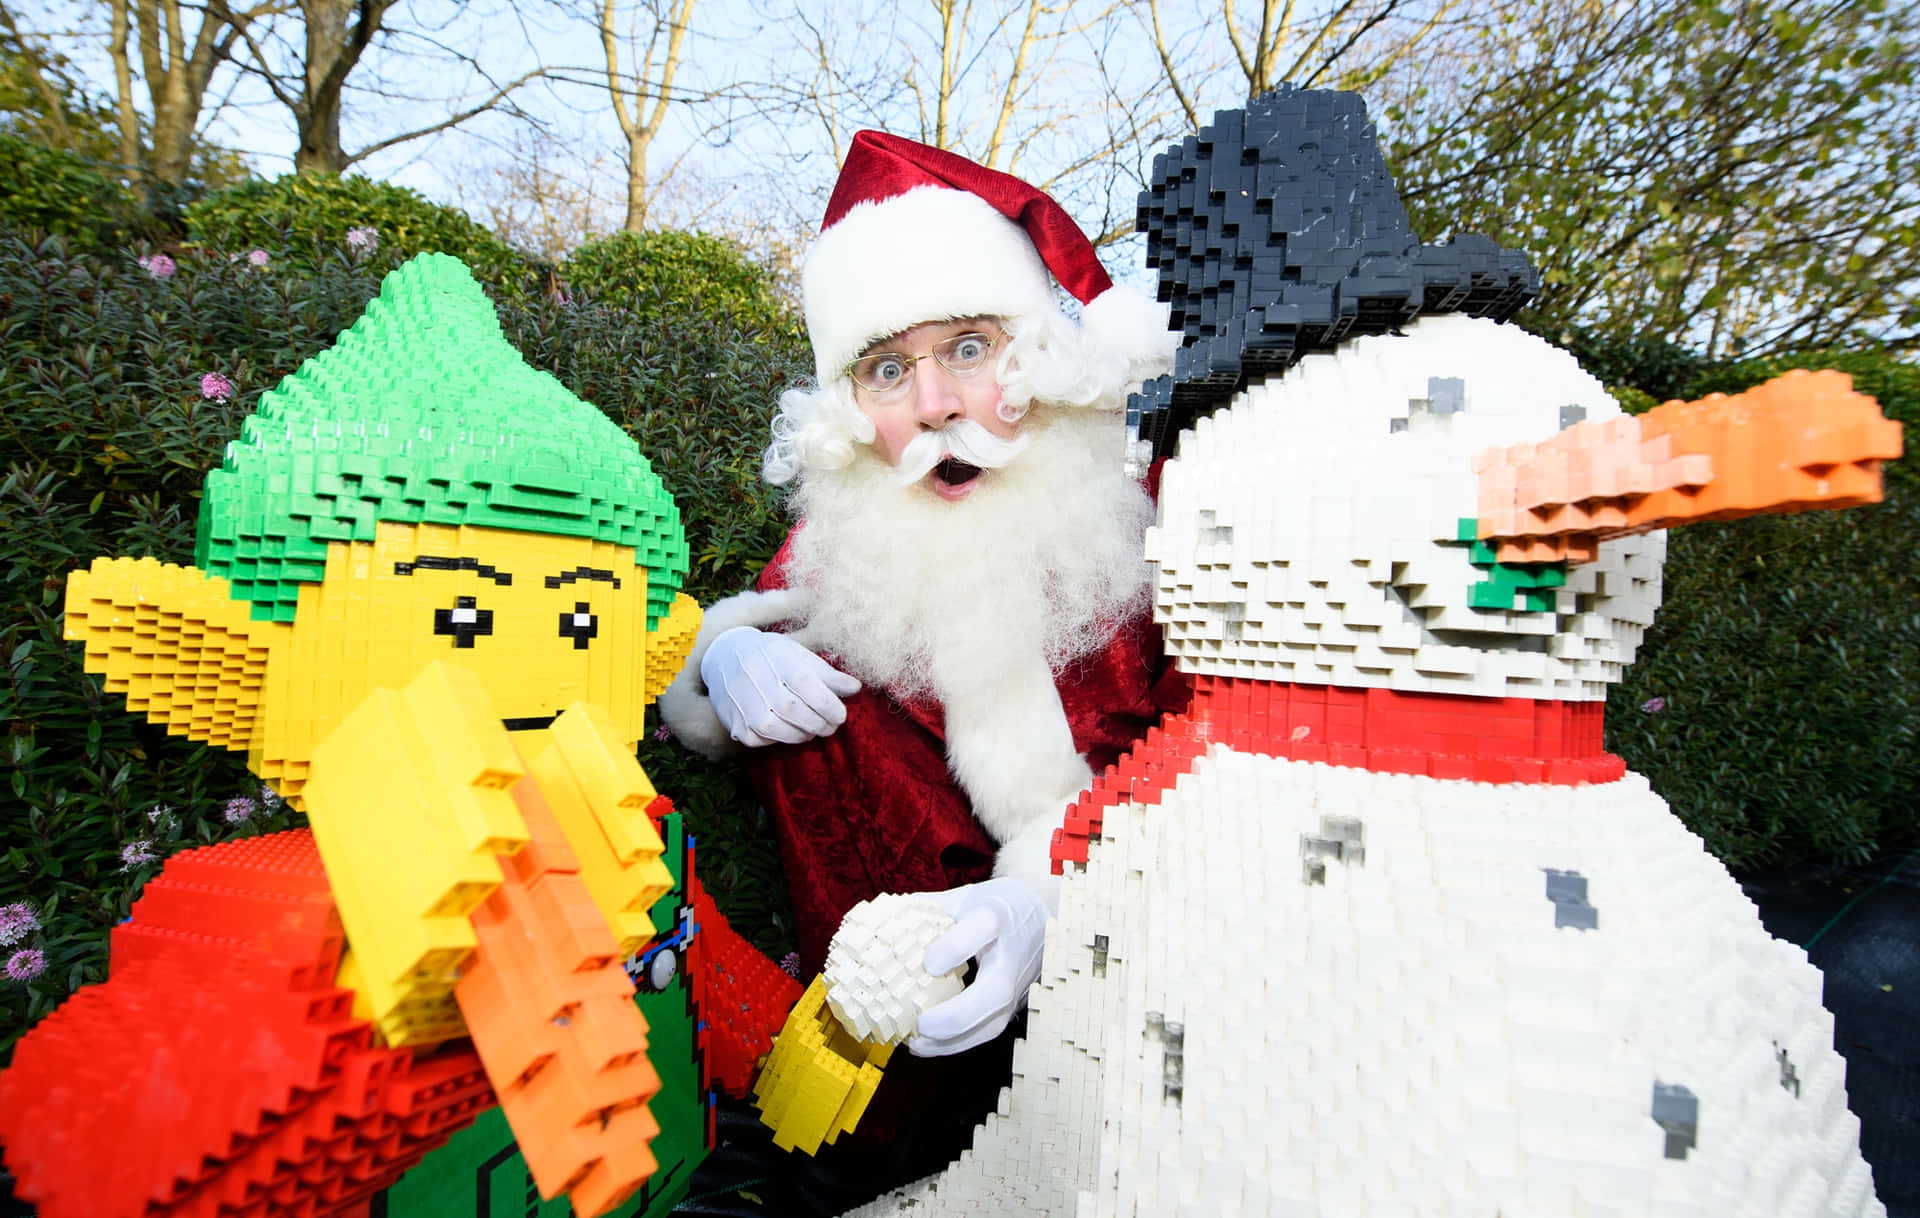 Take the kids to Legoland for a unique experience